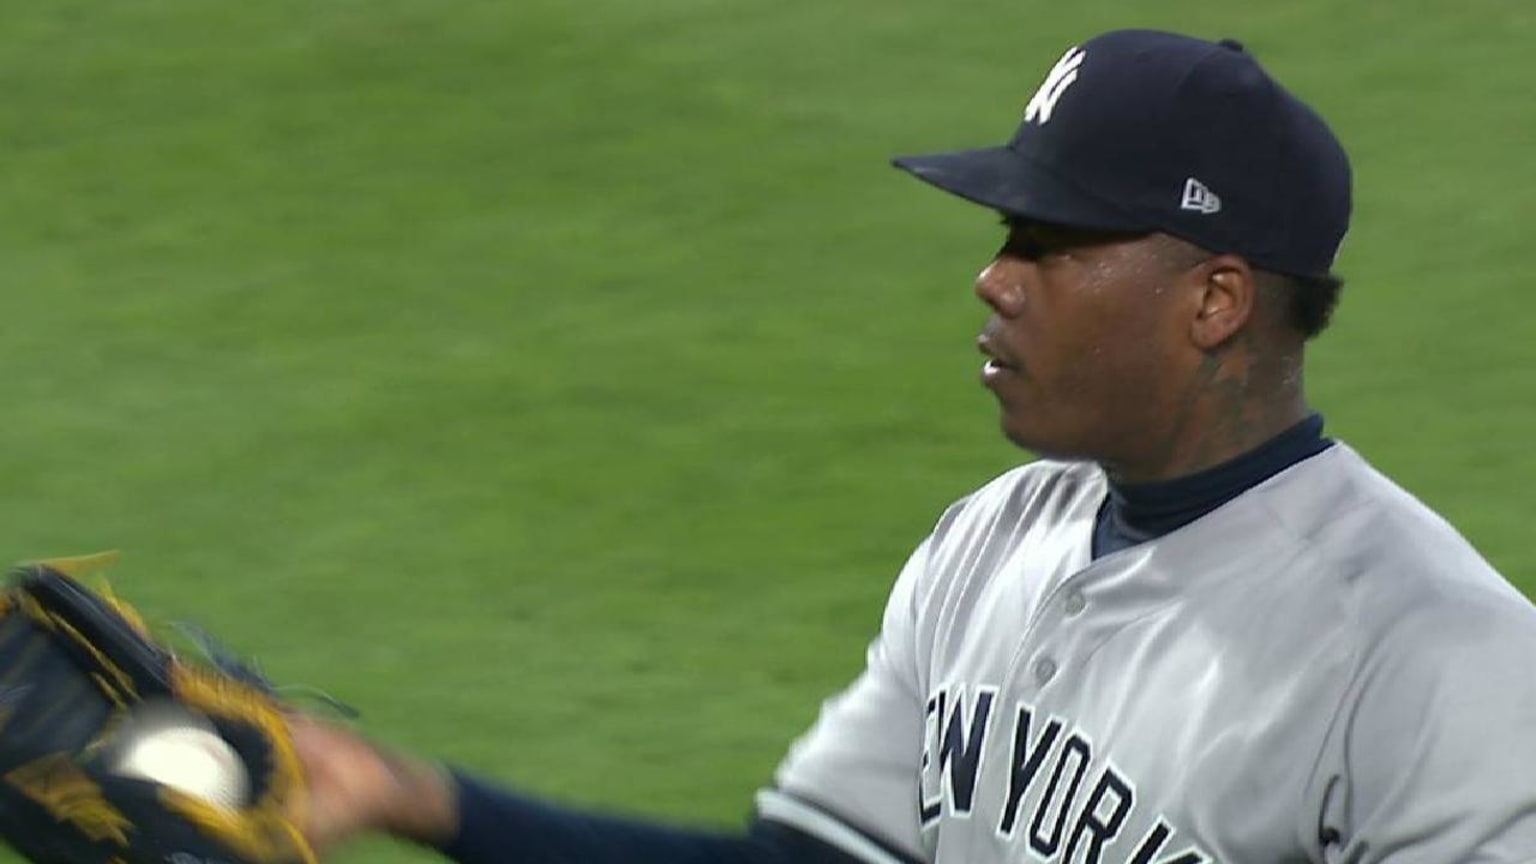 Girardi clears air with Chapman, booed before Game 3